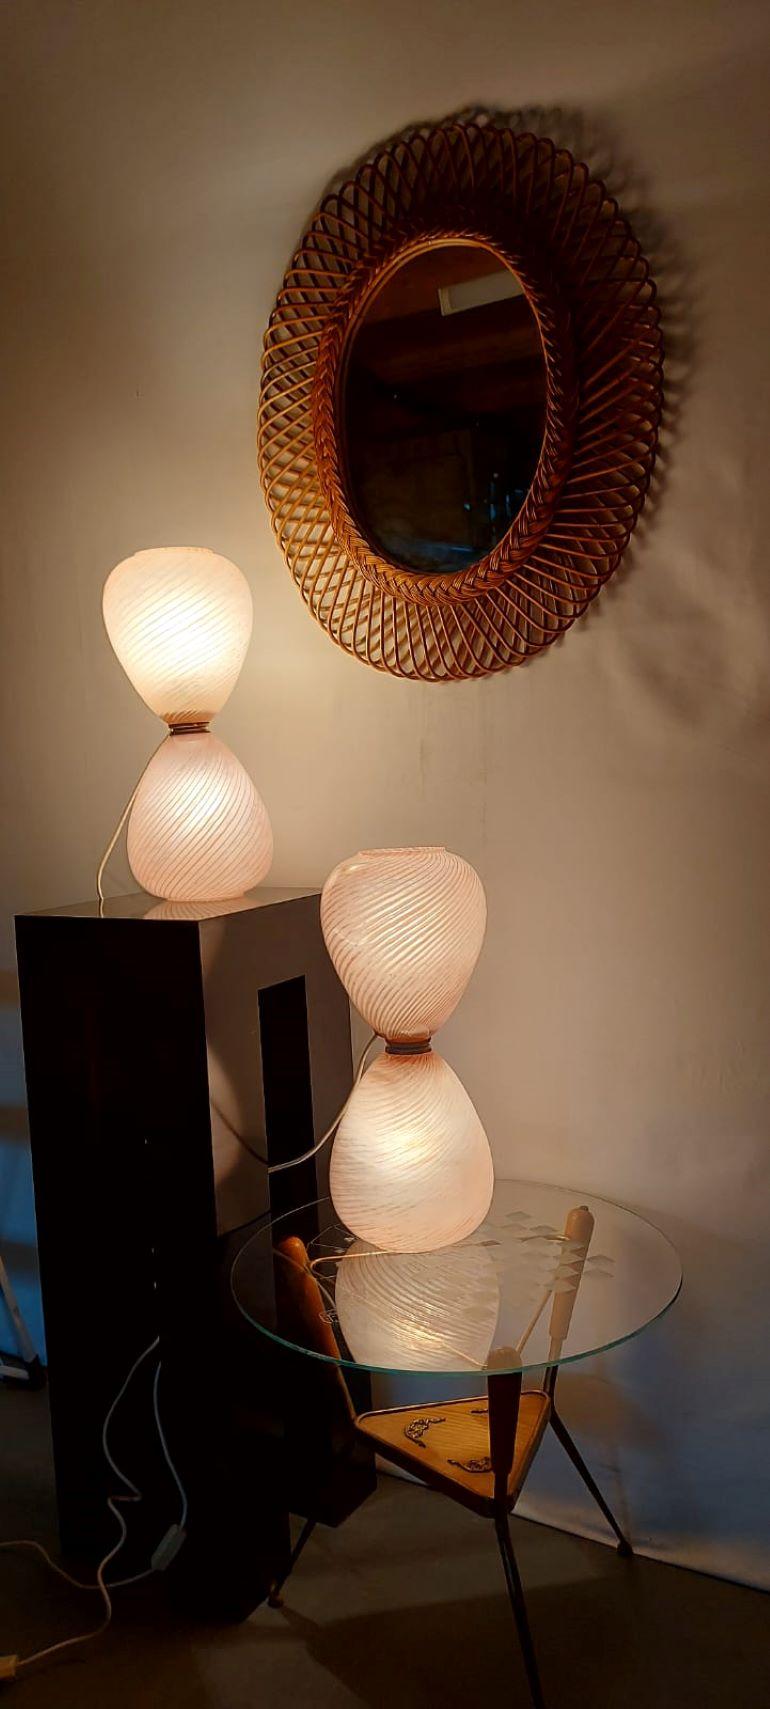 Pair of Pink Pale Blown Glass Murano Hourglass Table Lamps.
The hand blown glass has a torchon and ribbed effect.
Each lamp has two light bulbs one on the top and one at the bottom wich can be switched on alternately